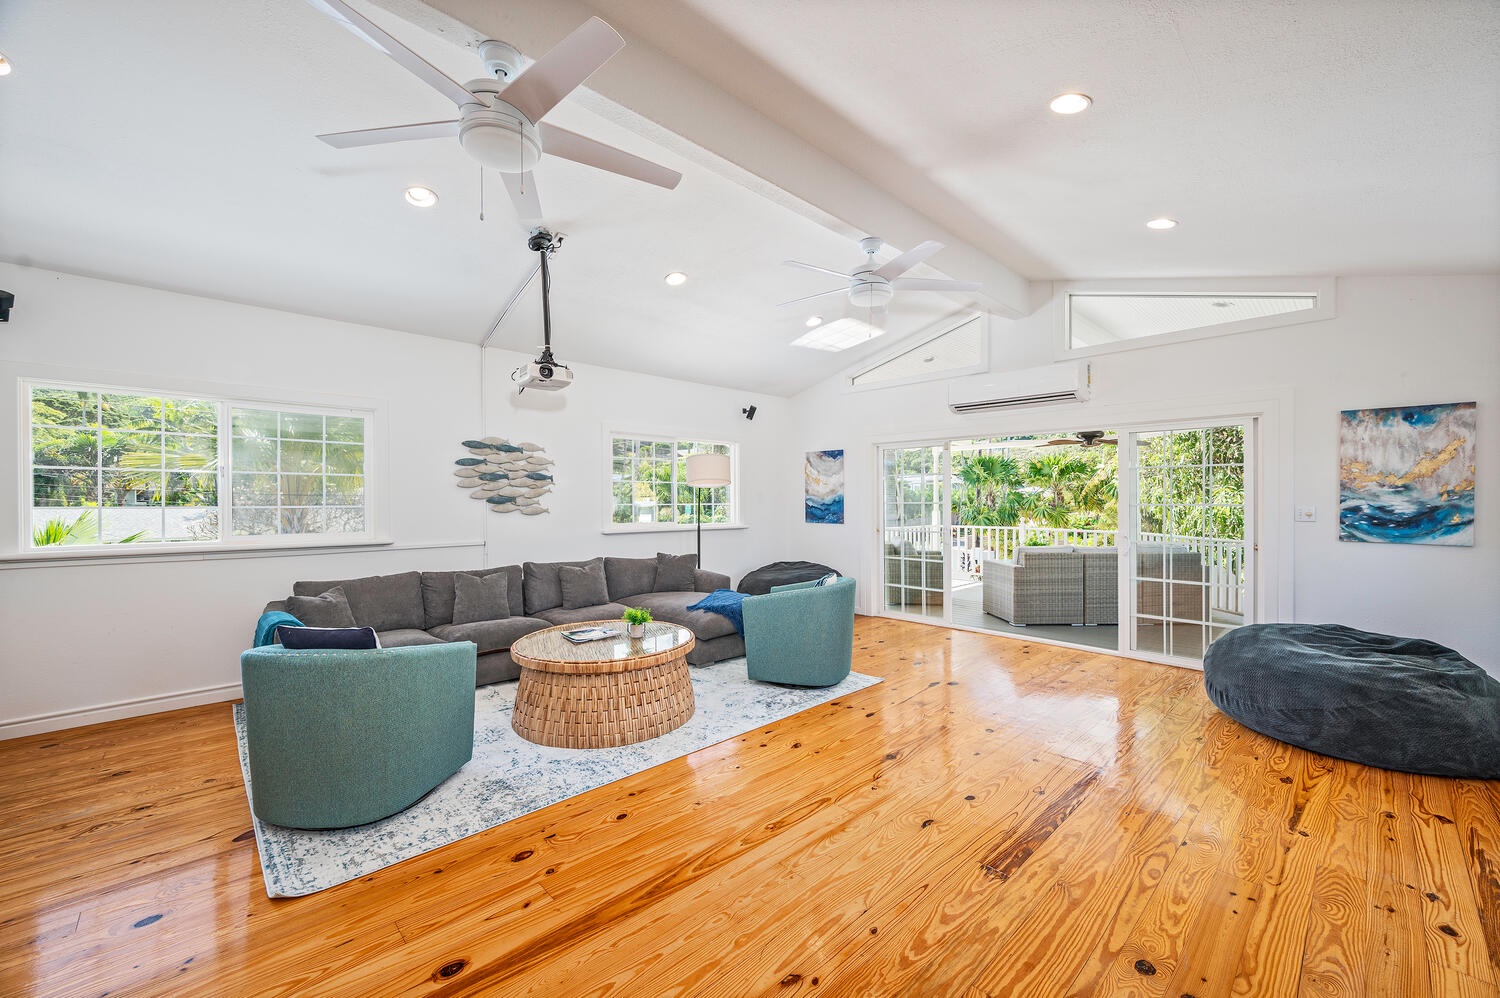 Kailua Vacation Rentals, Villa Hui Hou - Media room with a large deck that has a birds eye view of the pool!